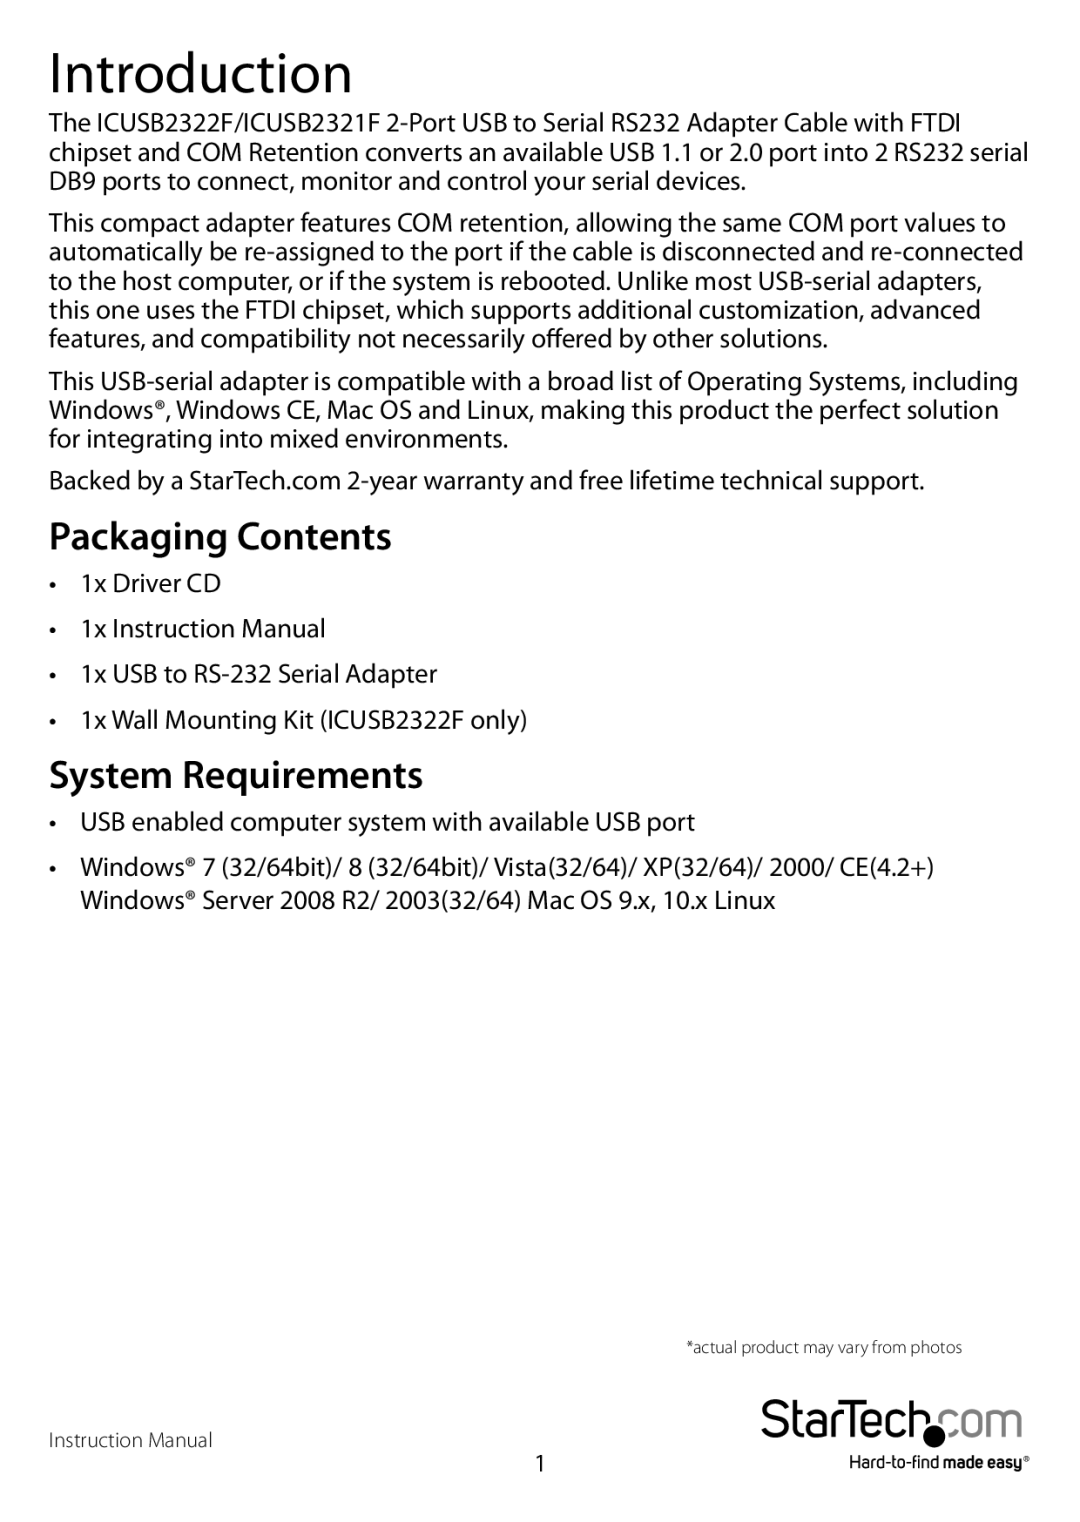 StarTech.com icusb2321f manual Introduction, Packaging Contents, System Requirements 